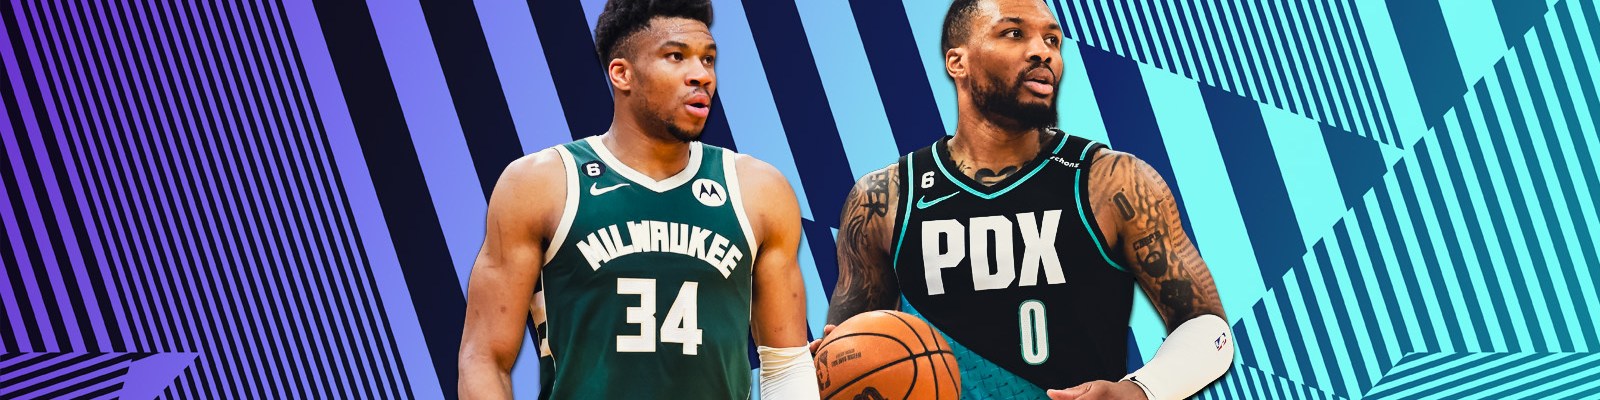 Giannis Antetokounmpo And Damian Lillard Now Have Everything They Could’ve Wanted